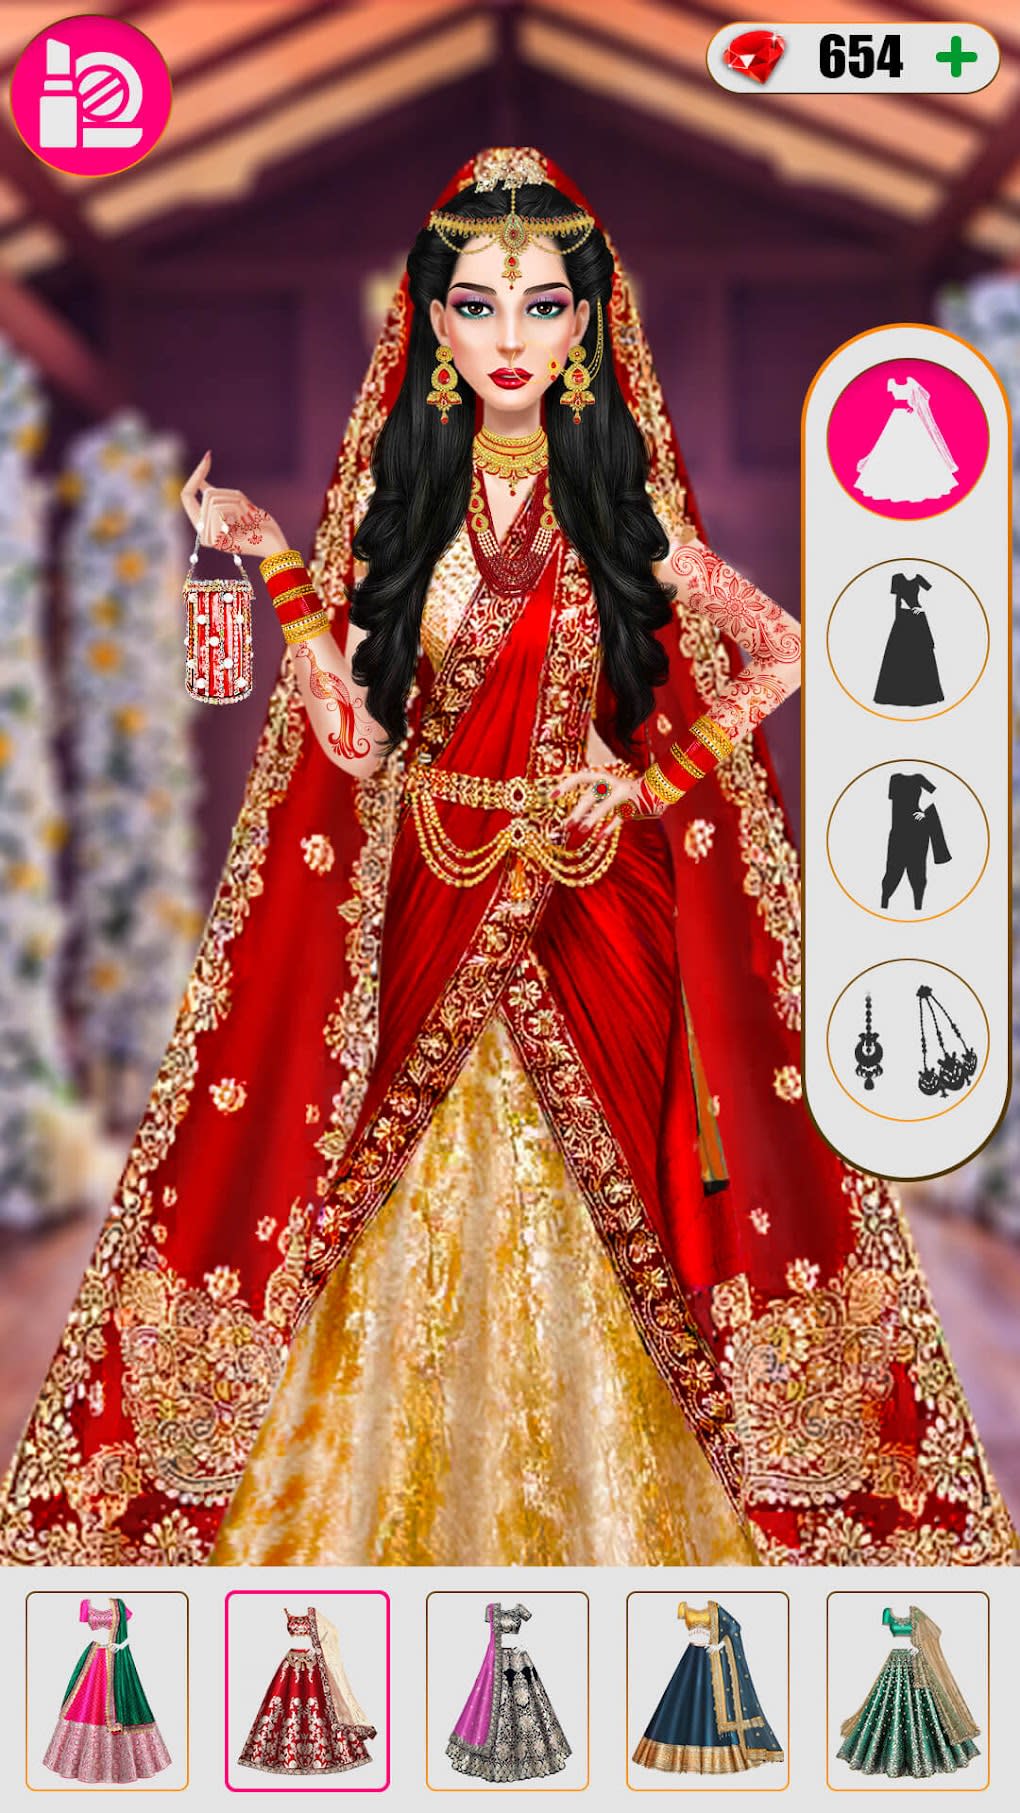 Fashion Princess Dress Up Game 2.0 APK Download - Android Lifestyle Apps